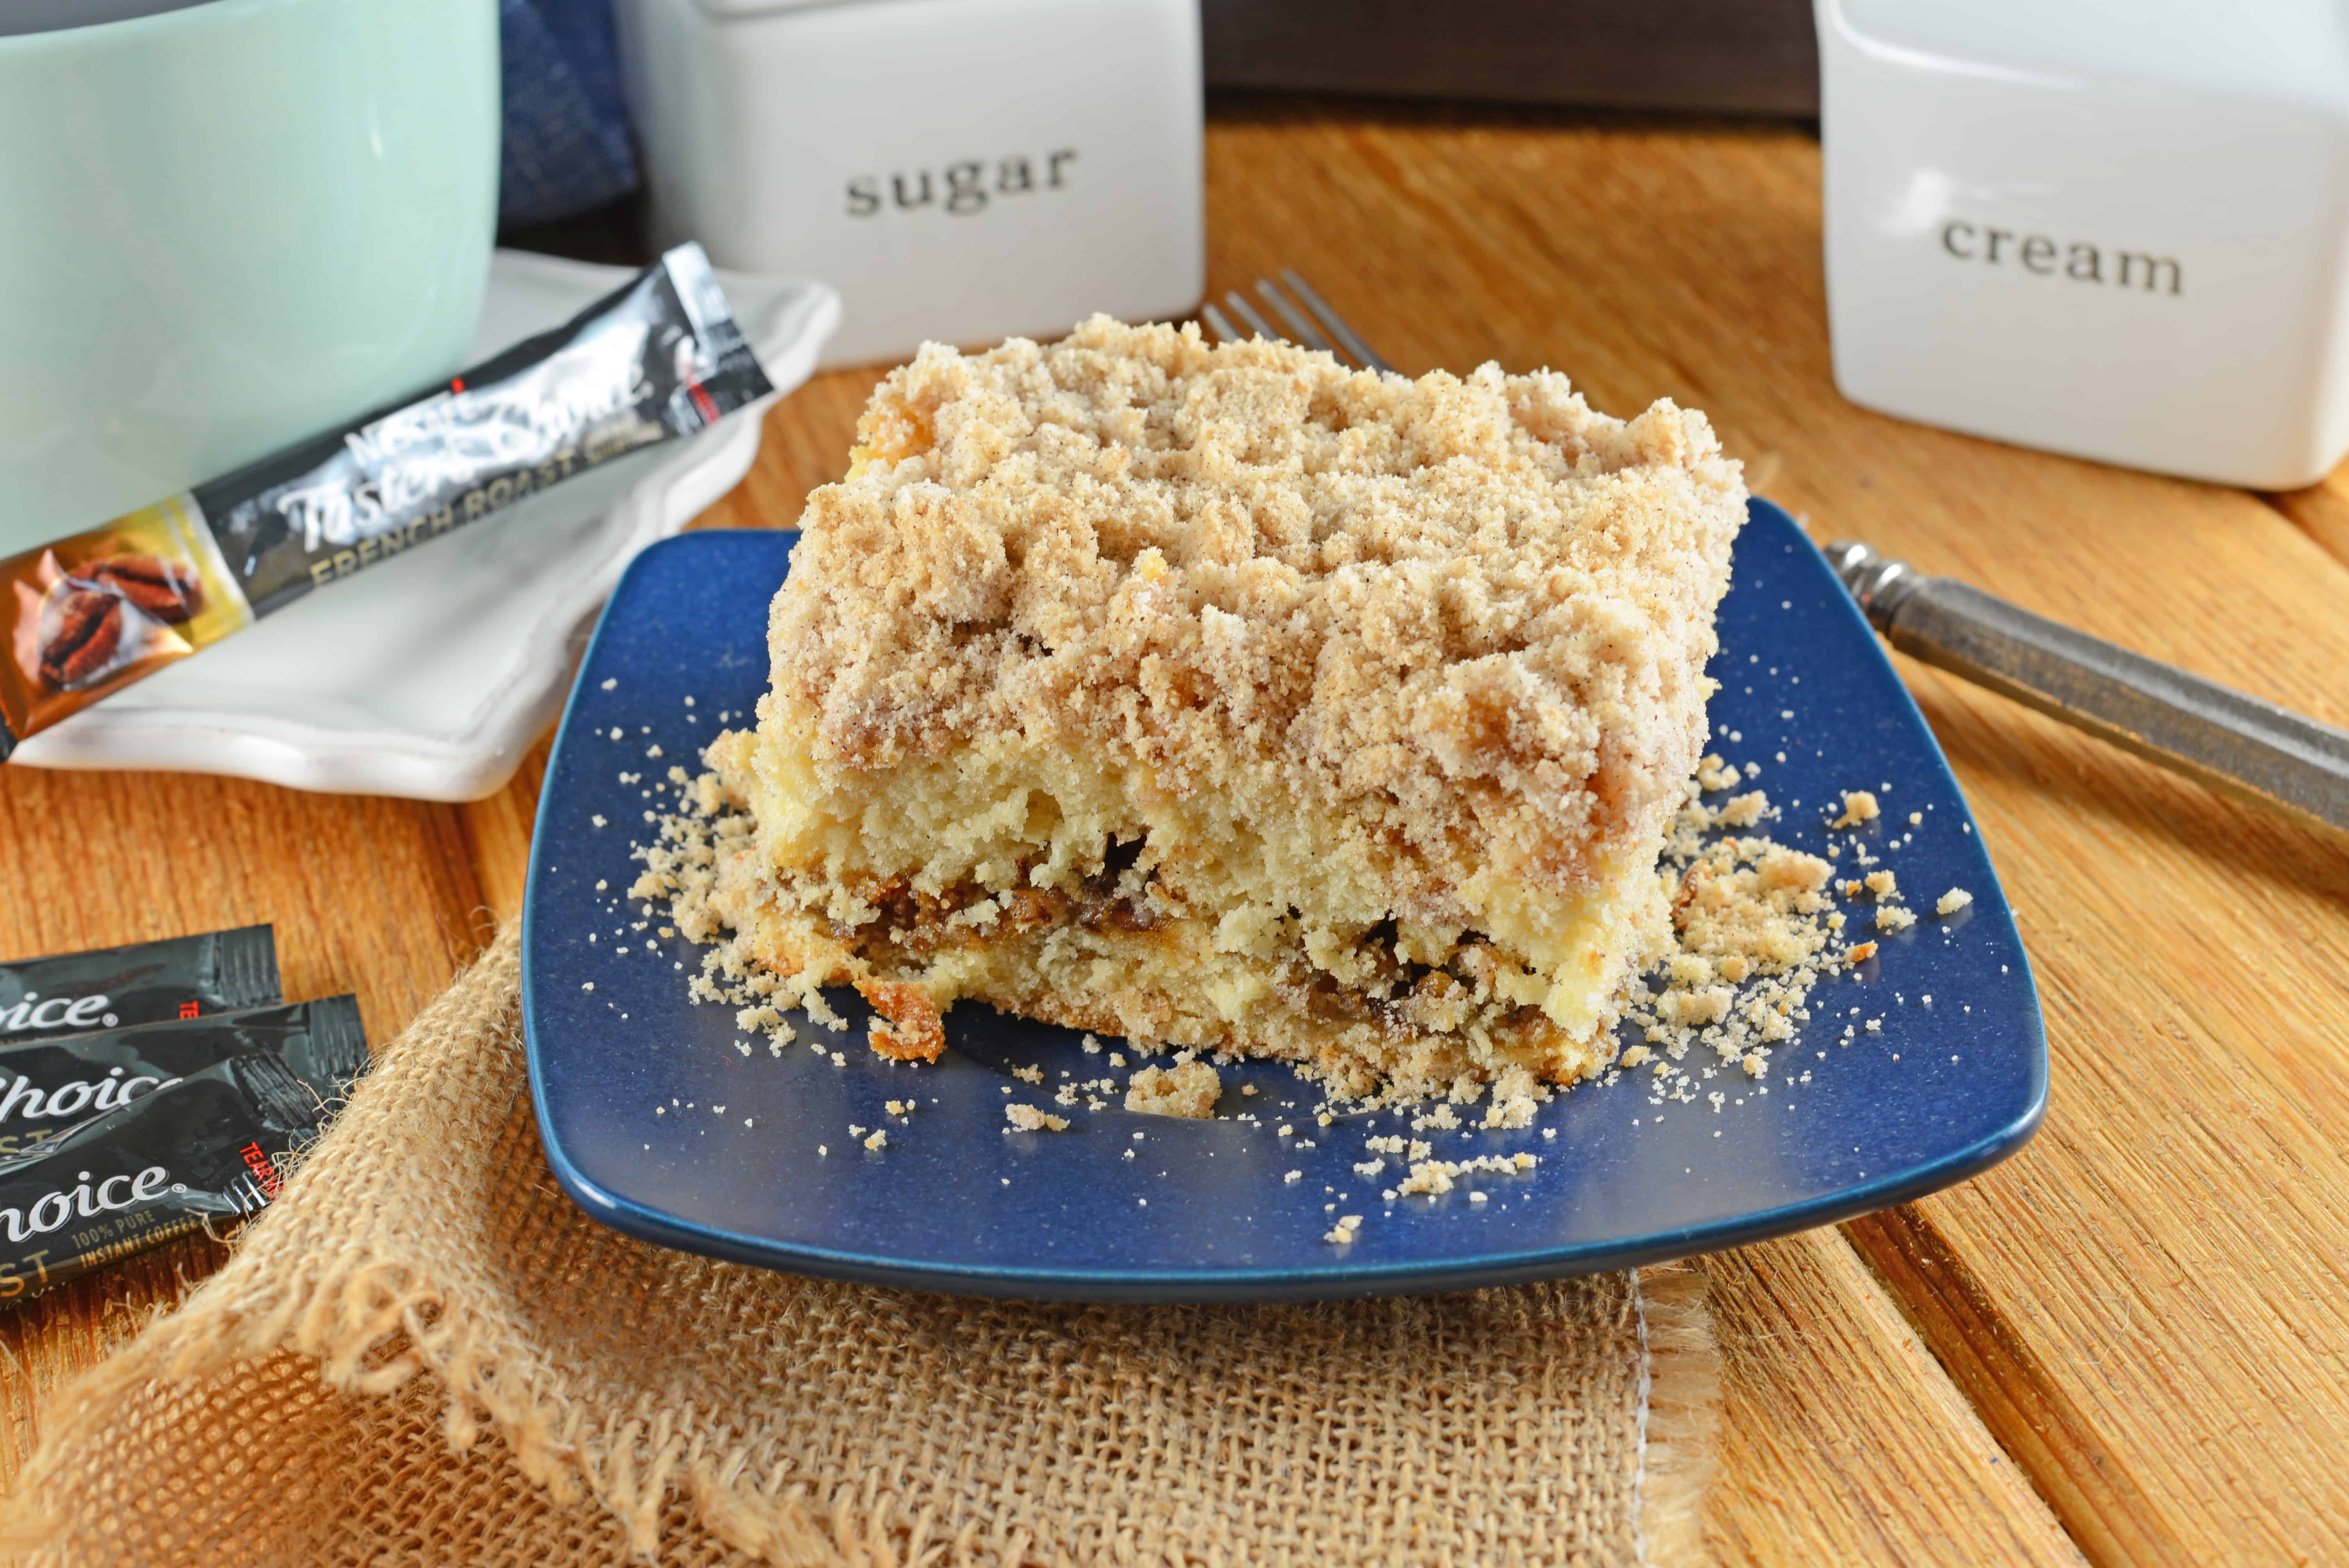 This is a classic Coffee Cake Recipe. Cinnamon streusel topping and a ribbon of brown sugar filling make this moist cake perfect for breakfast, brunch or serving with afternoon tea.